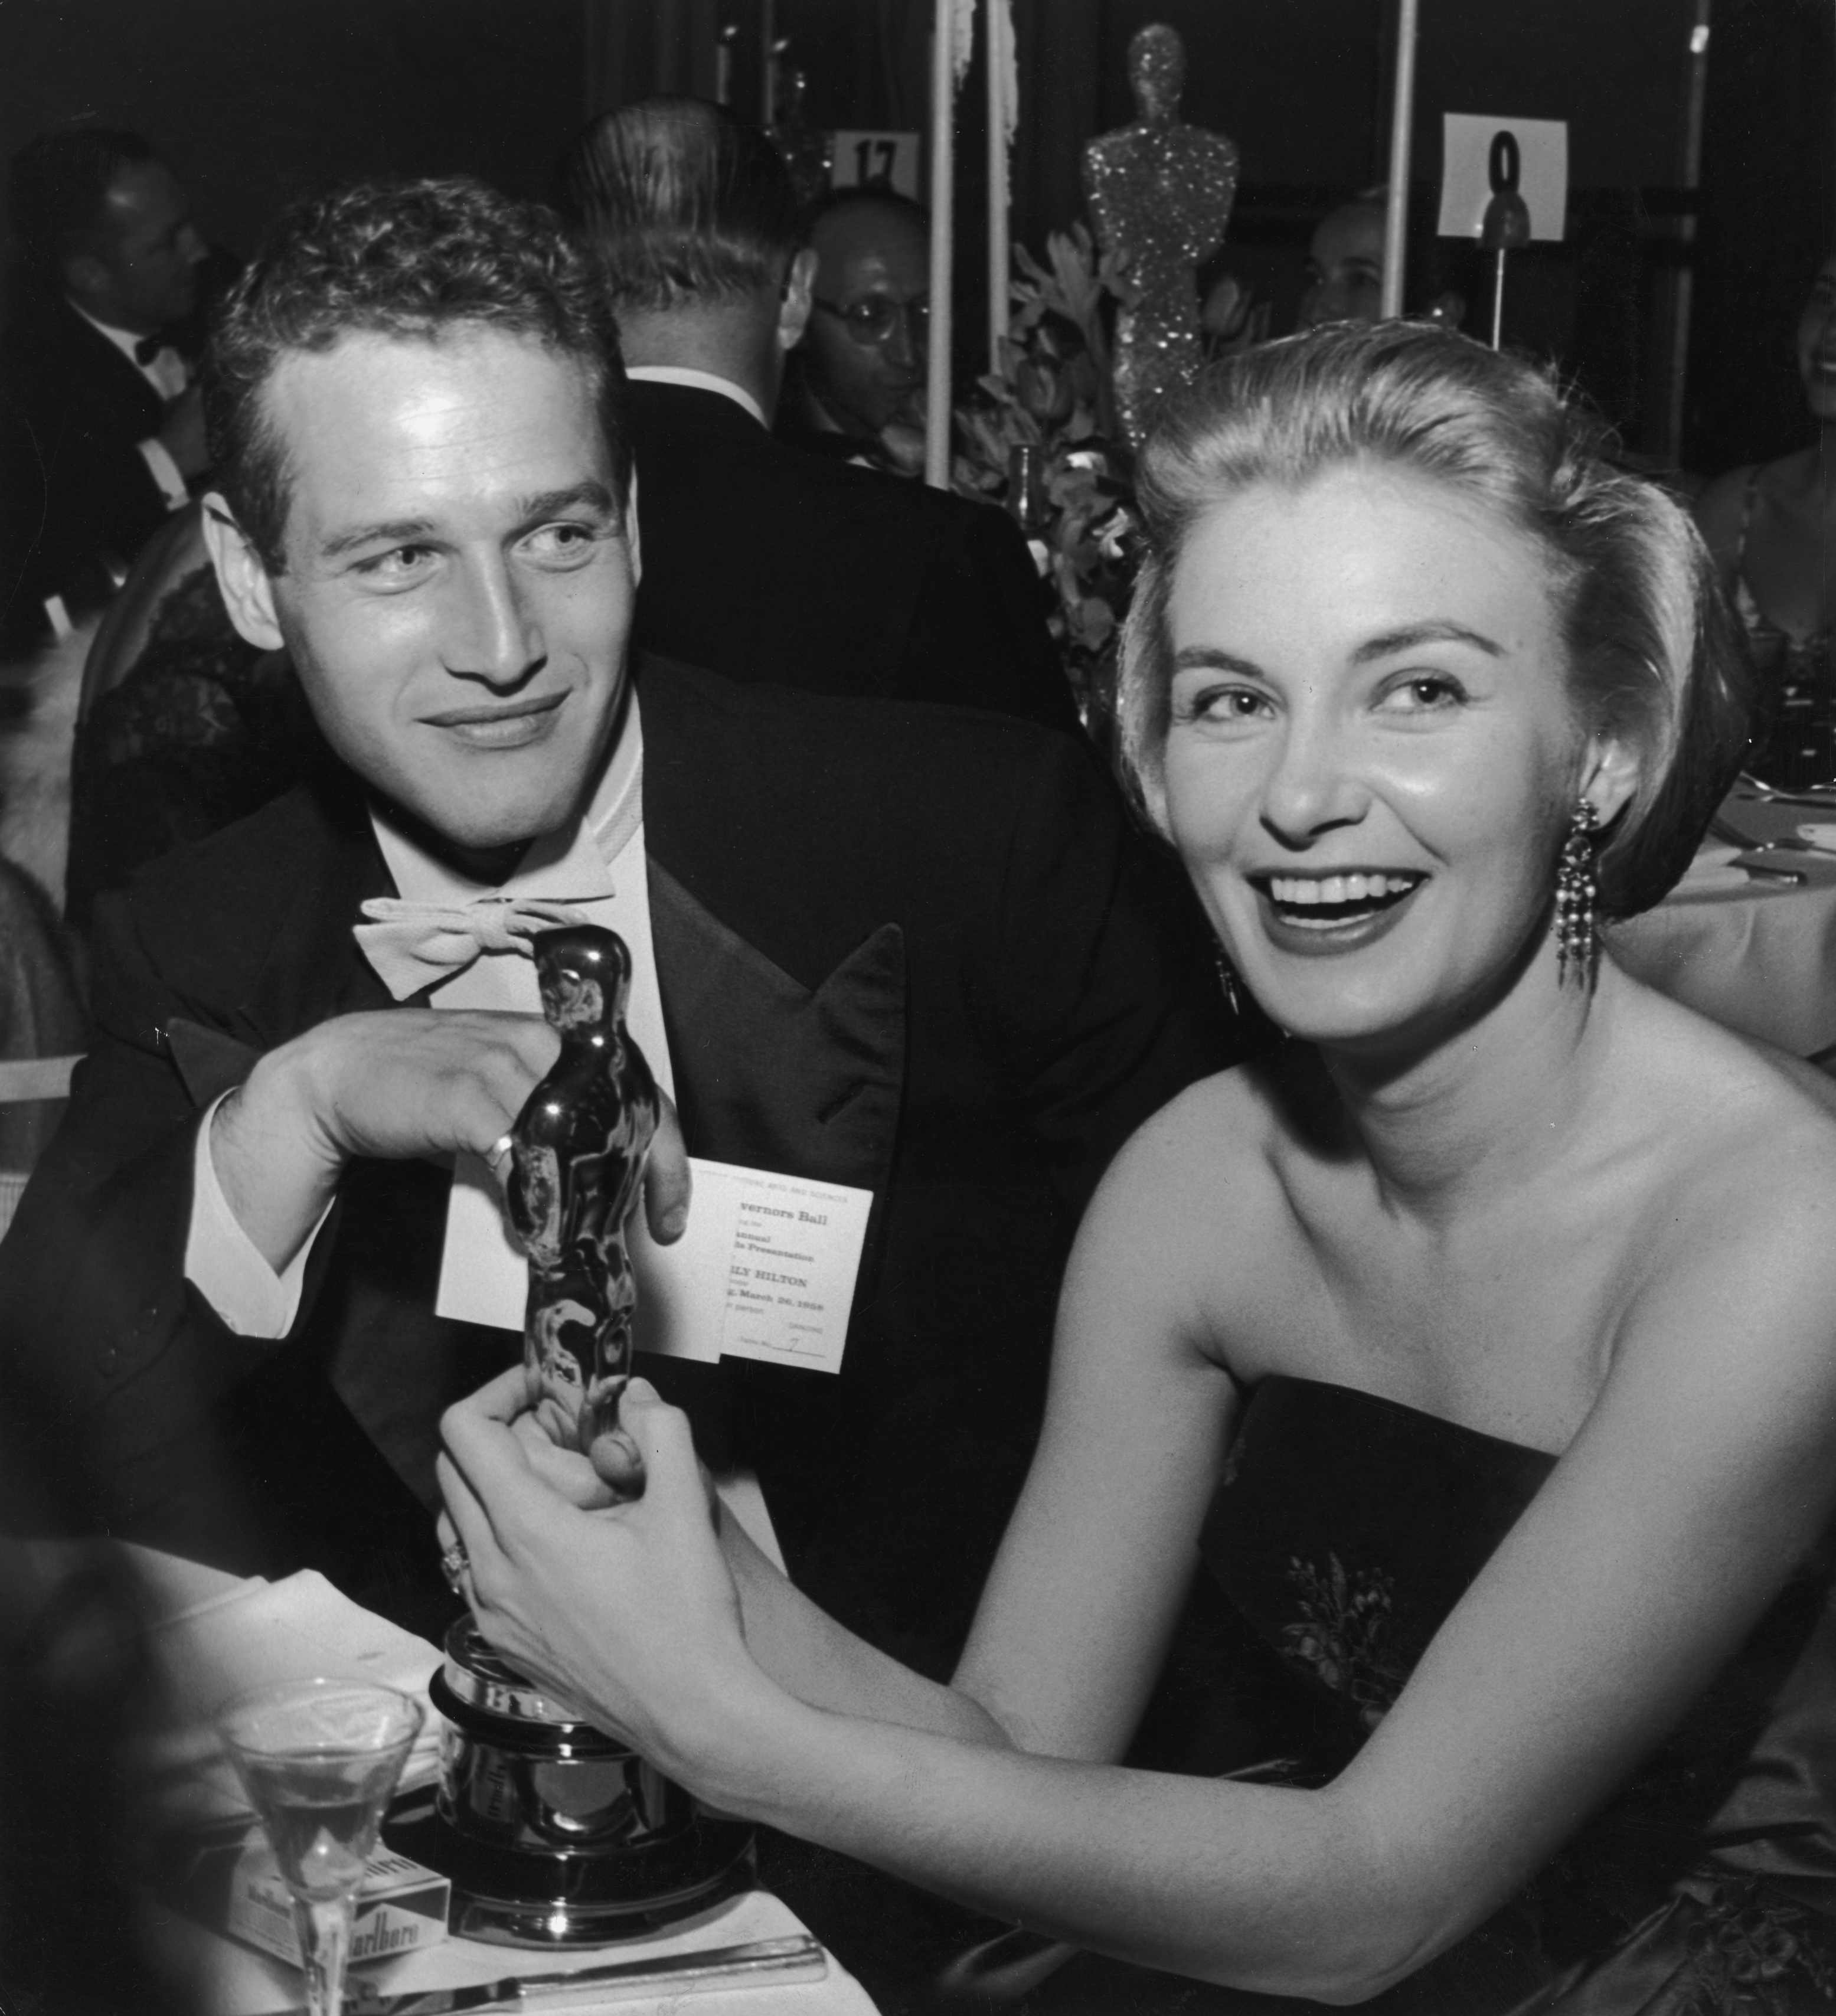 Joanne Woodward holds her Oscar for “The Three Faces of Eve” in 1958 while sitting next to husband, Paul Newman, during an Academy Awards party | Source: Getty Images